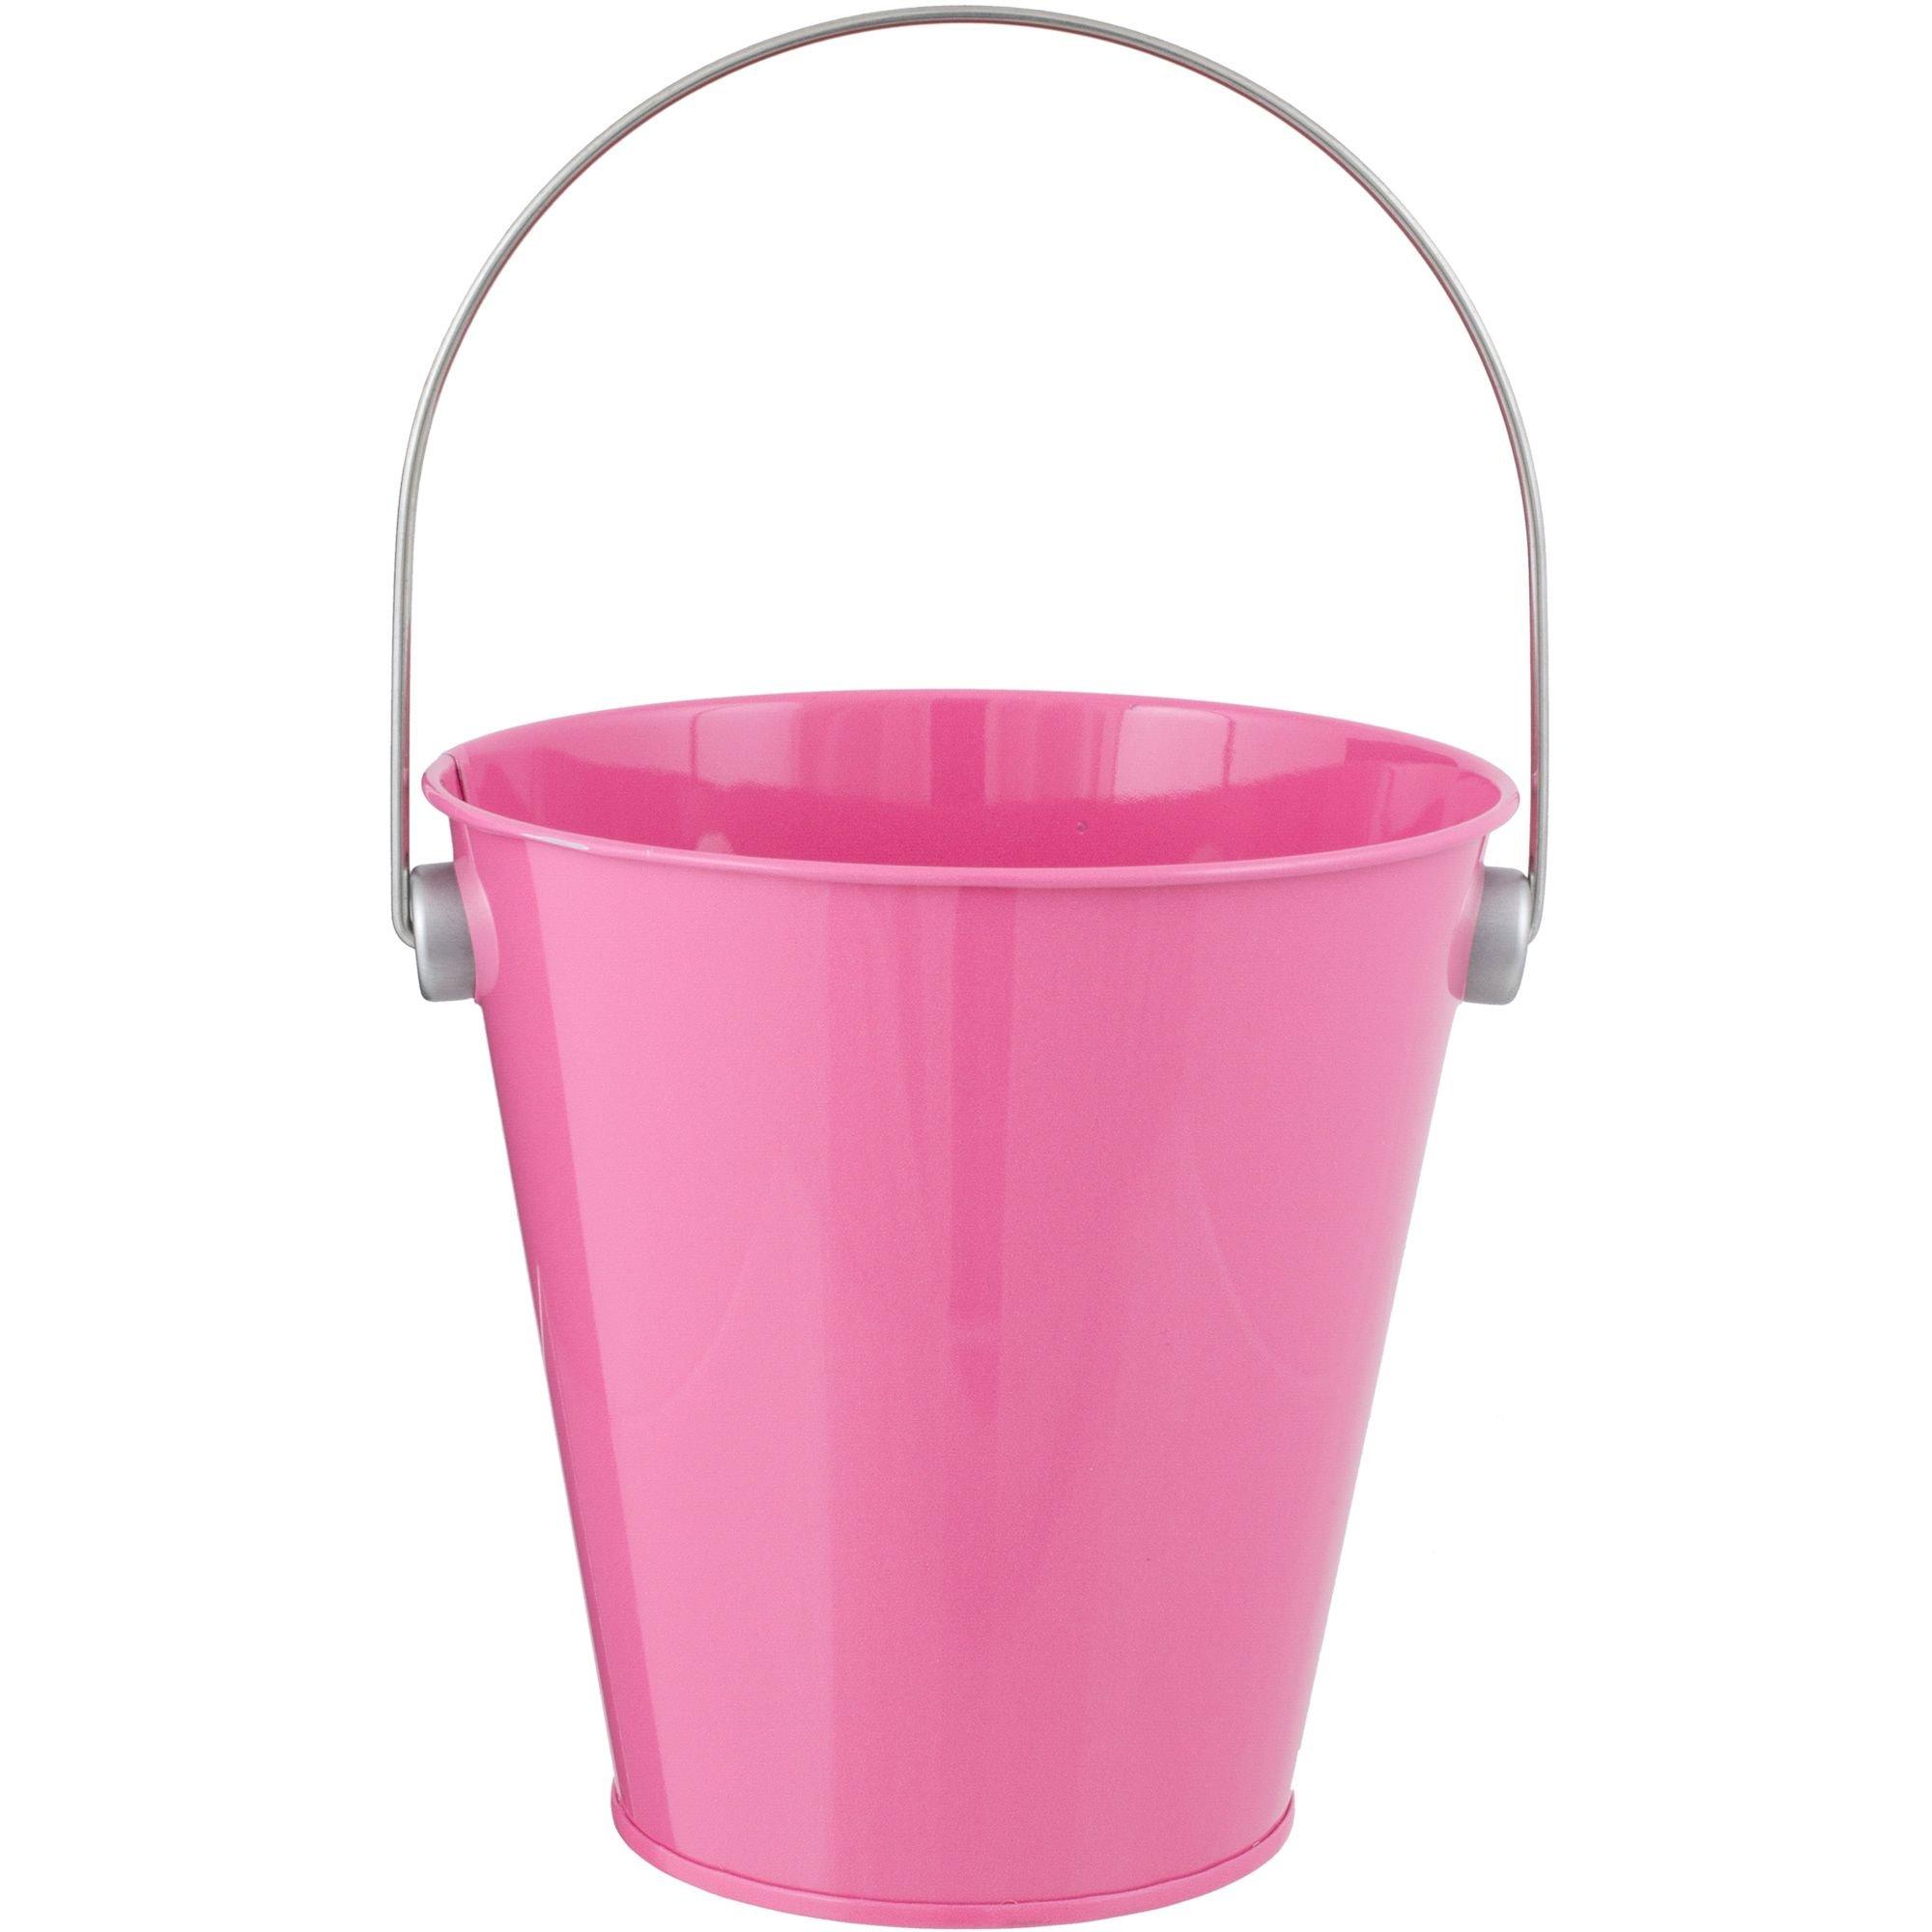 Pink Metal Buckets - Bucket Outlet